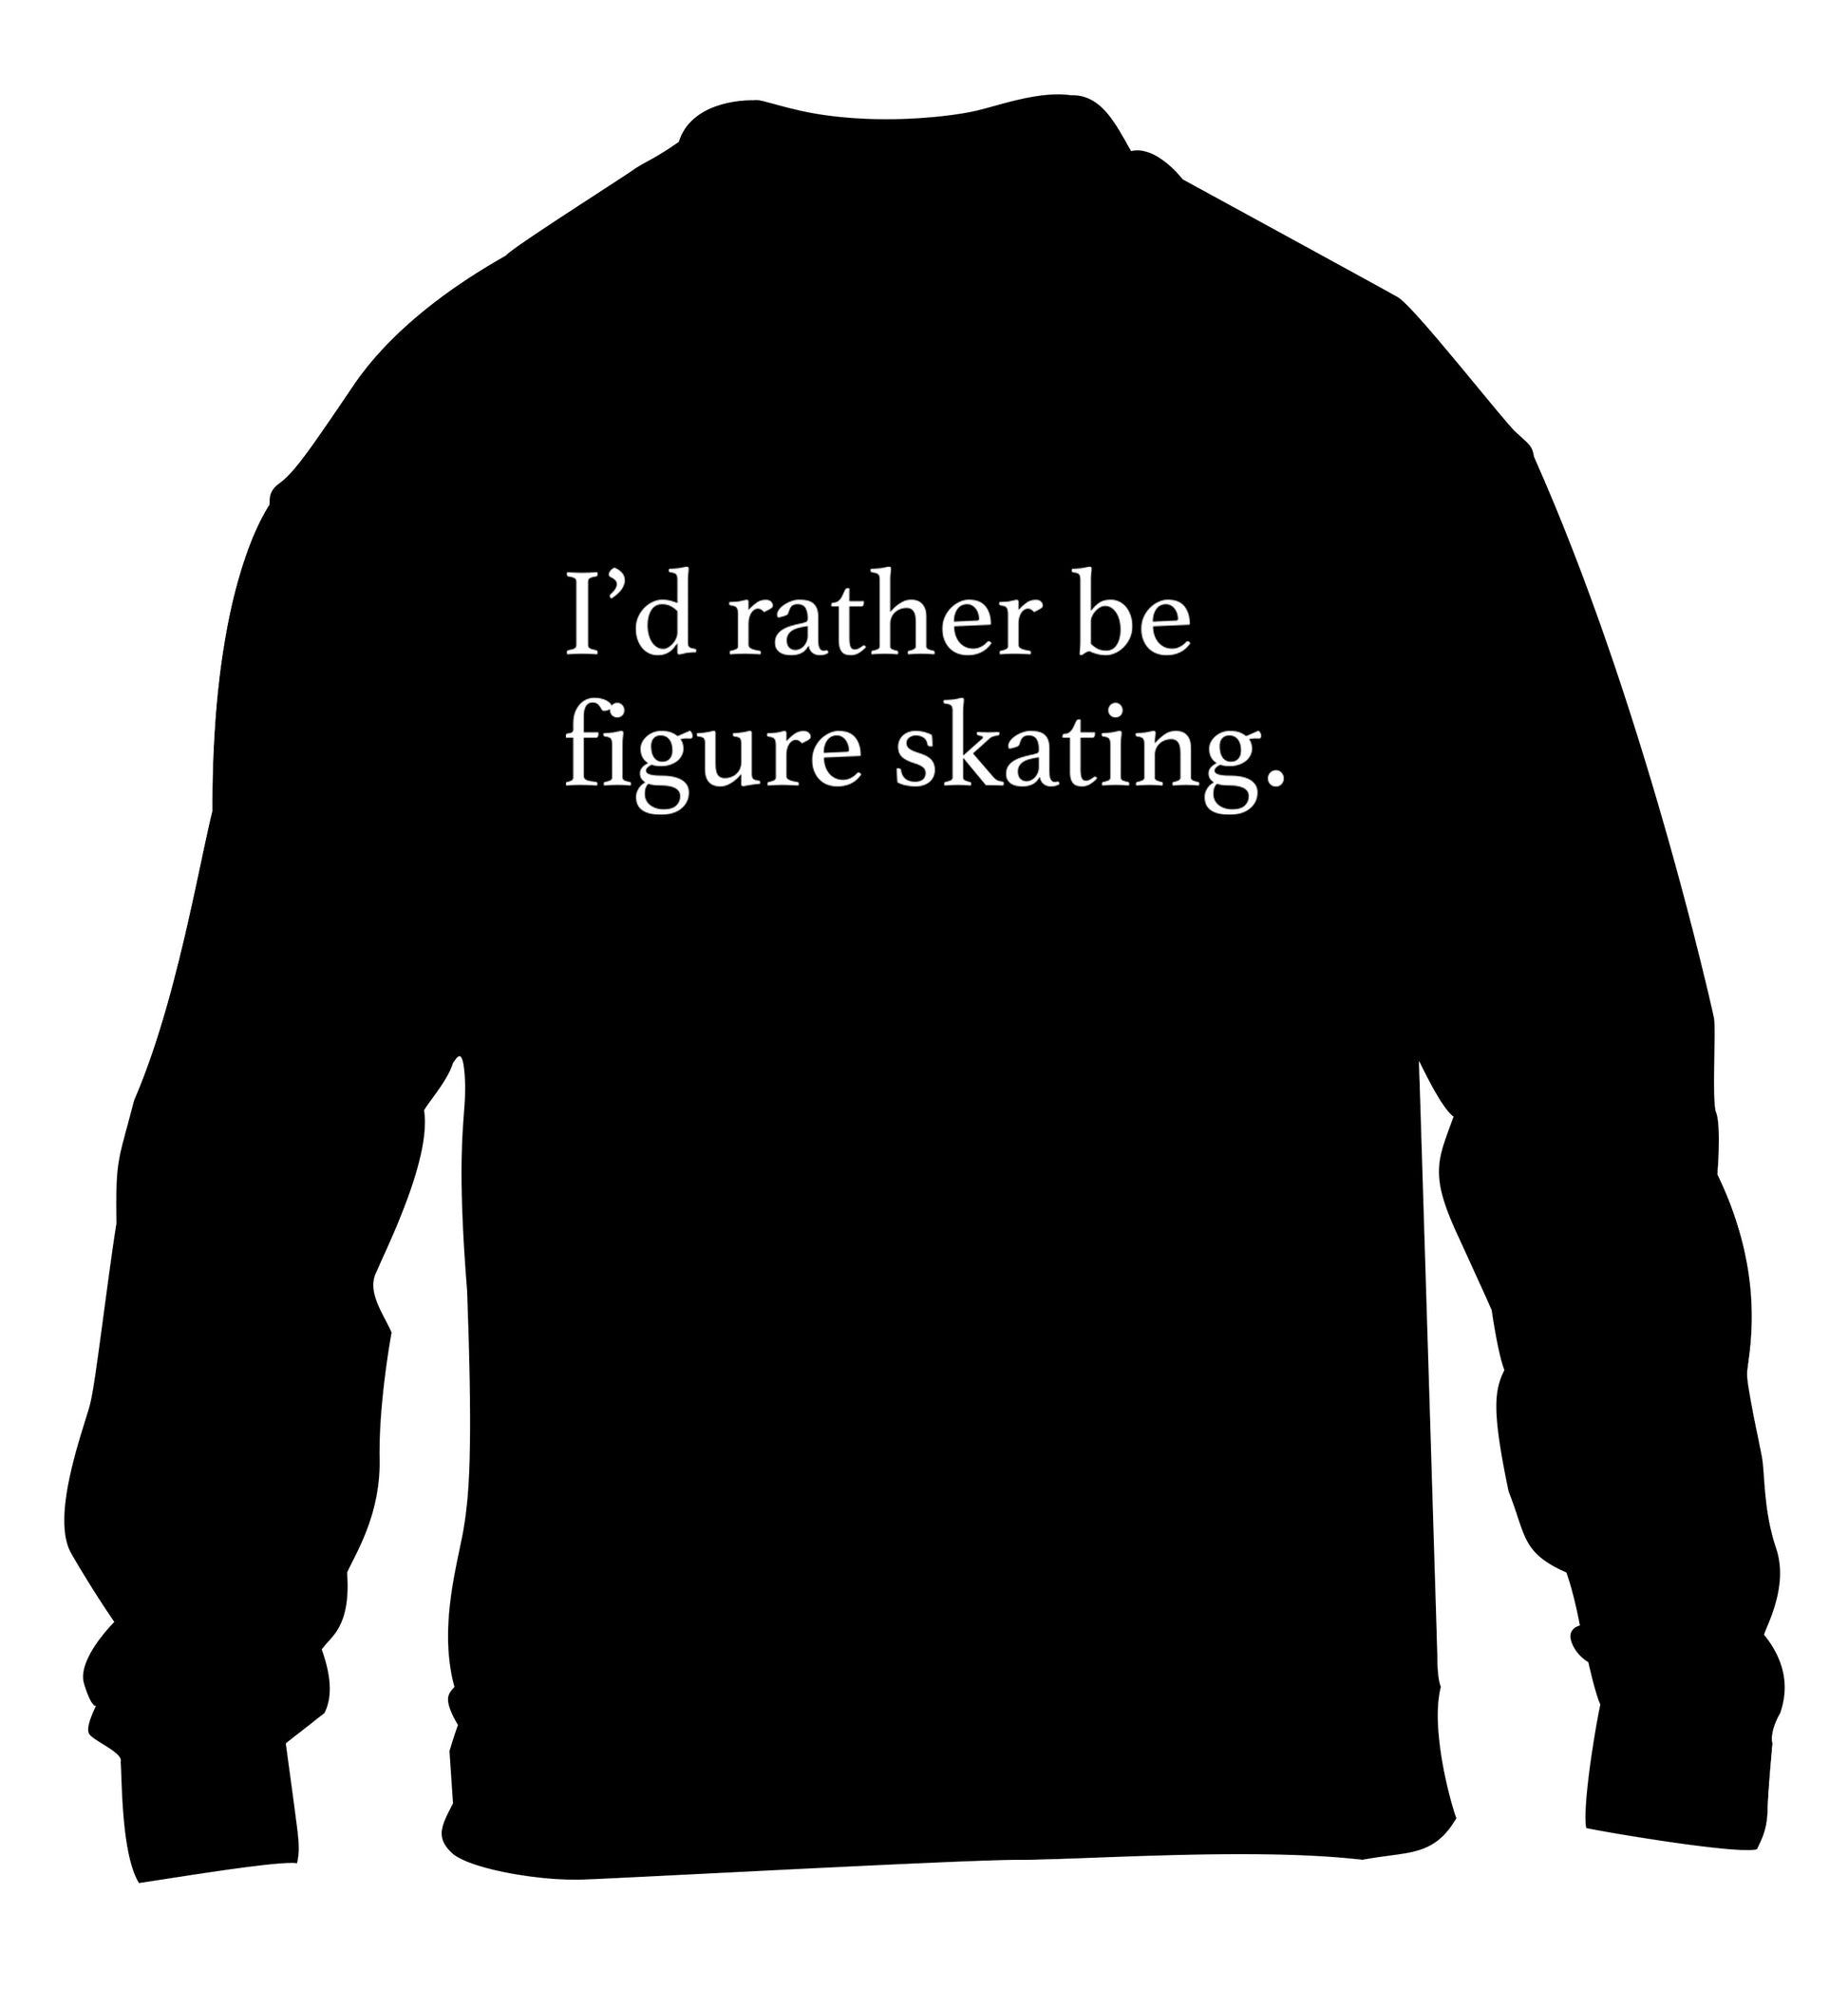 I'd rather be figure skating children's black sweater 12-14 Years